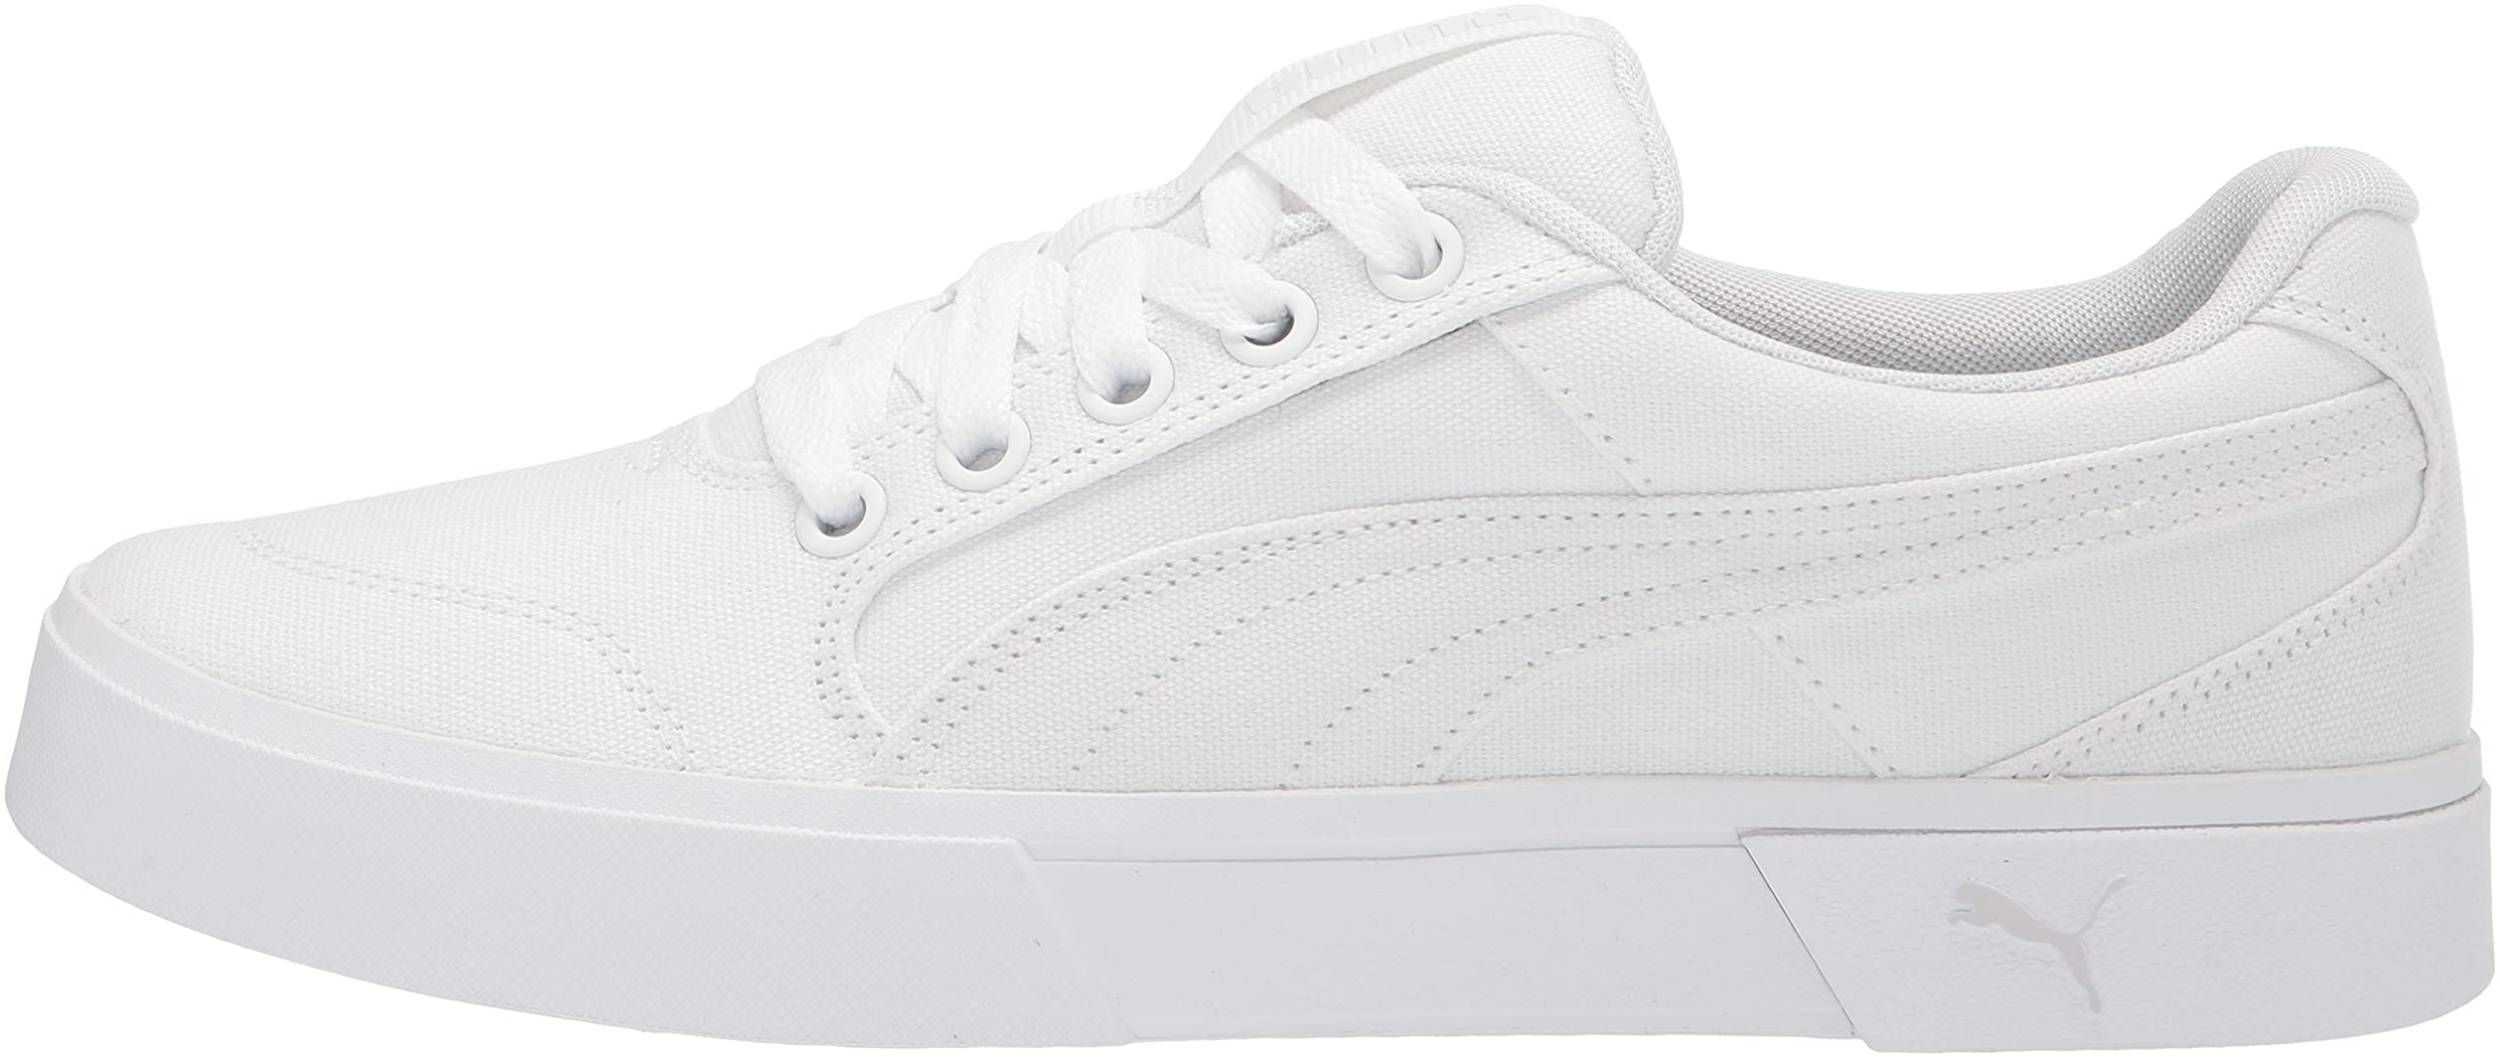 50+ White Puma sneakers: Save up to 50 